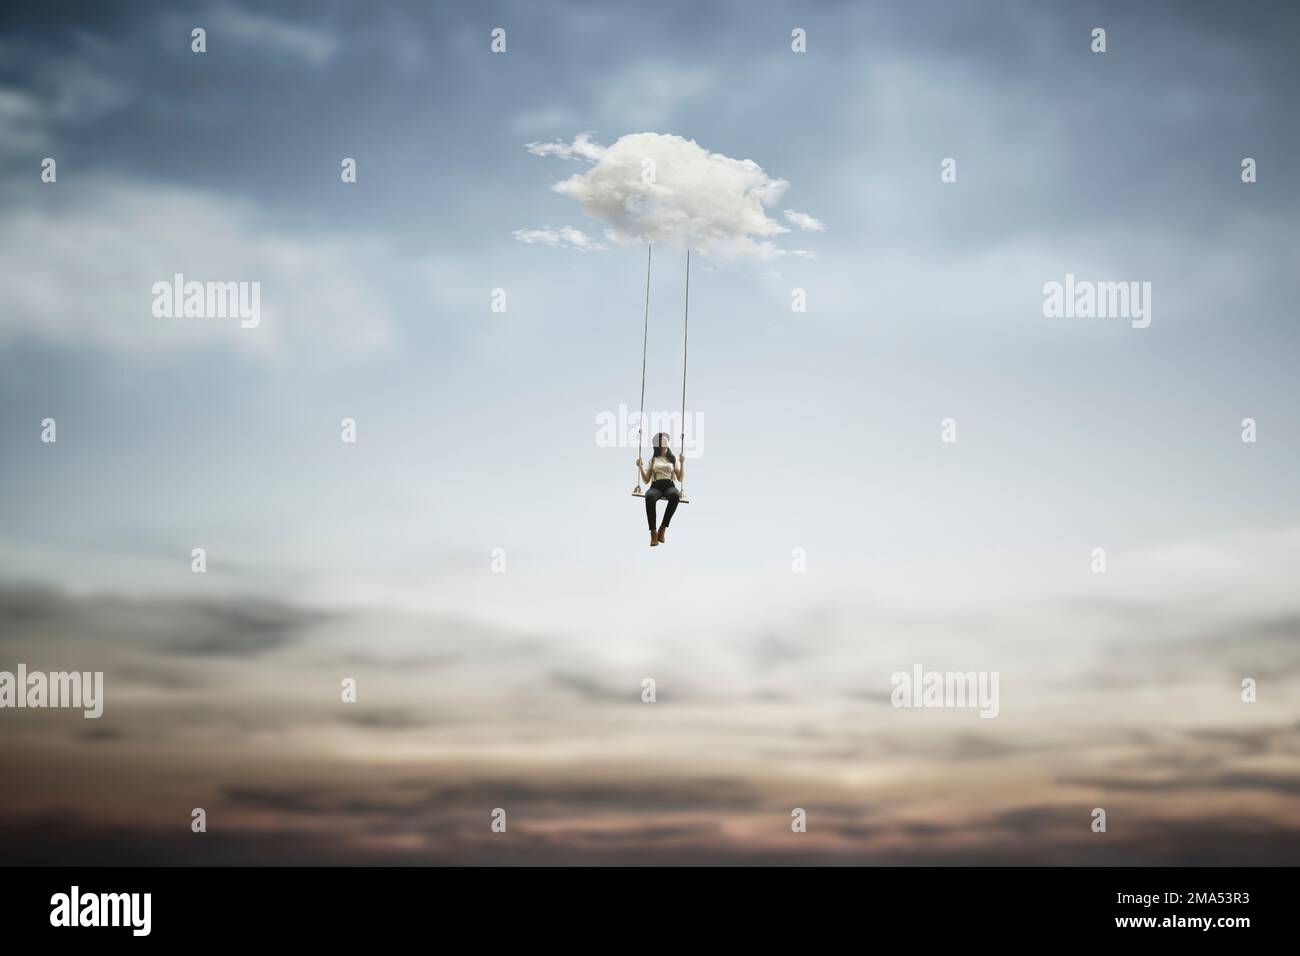 surreal woman having fun on a swing hanging from a cloud, abstract concept Stock Photo